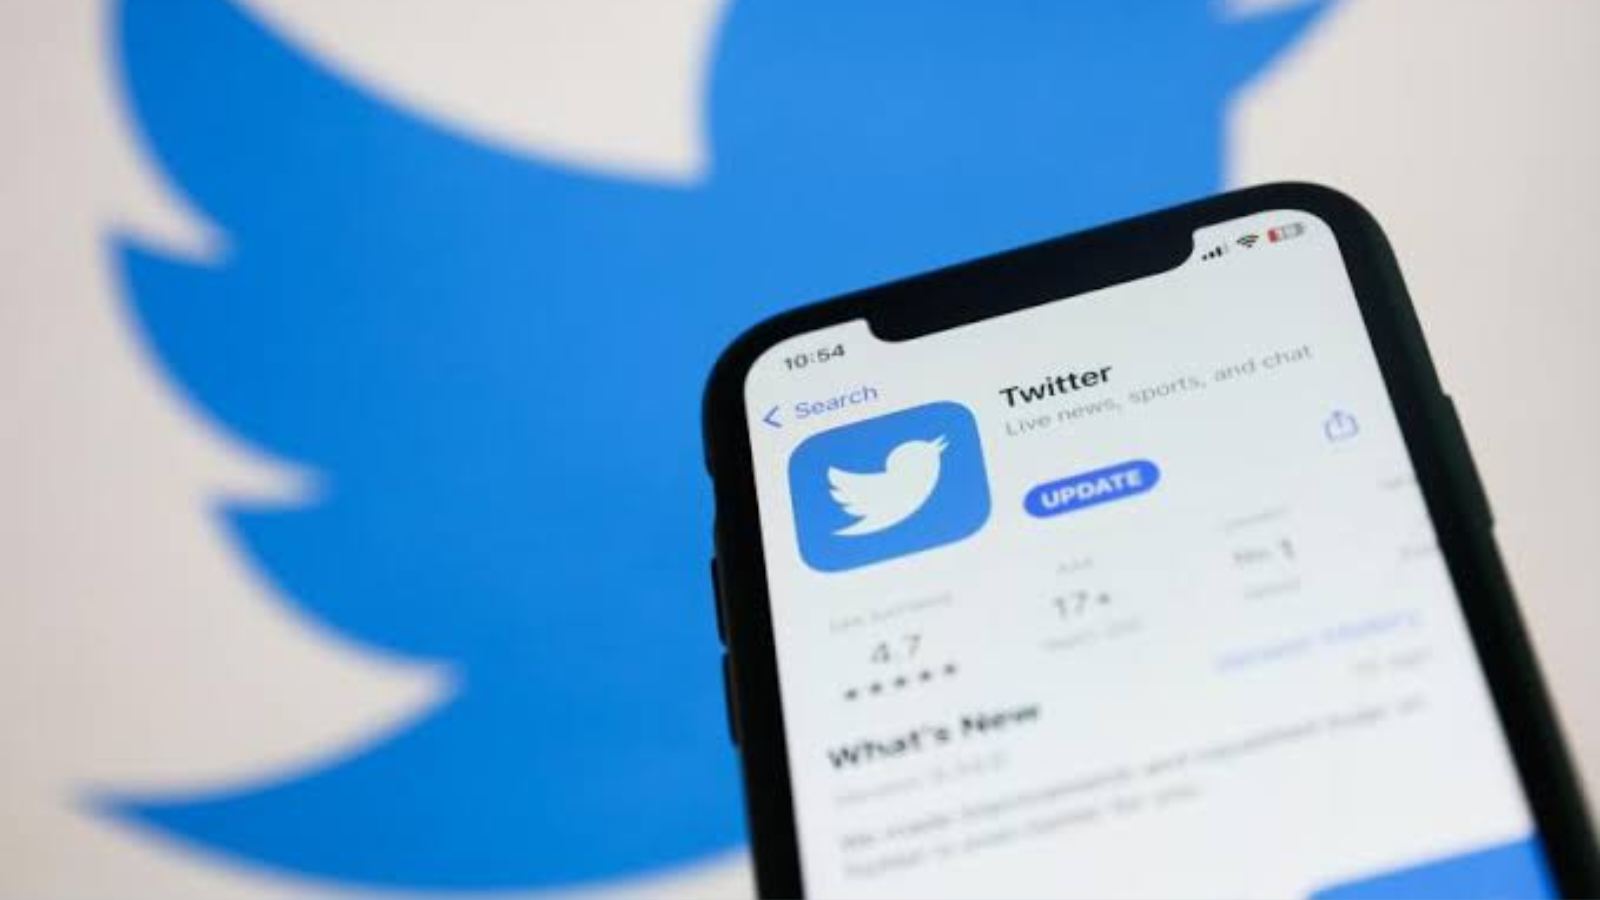 Apple may withhold Twitter for these reasons